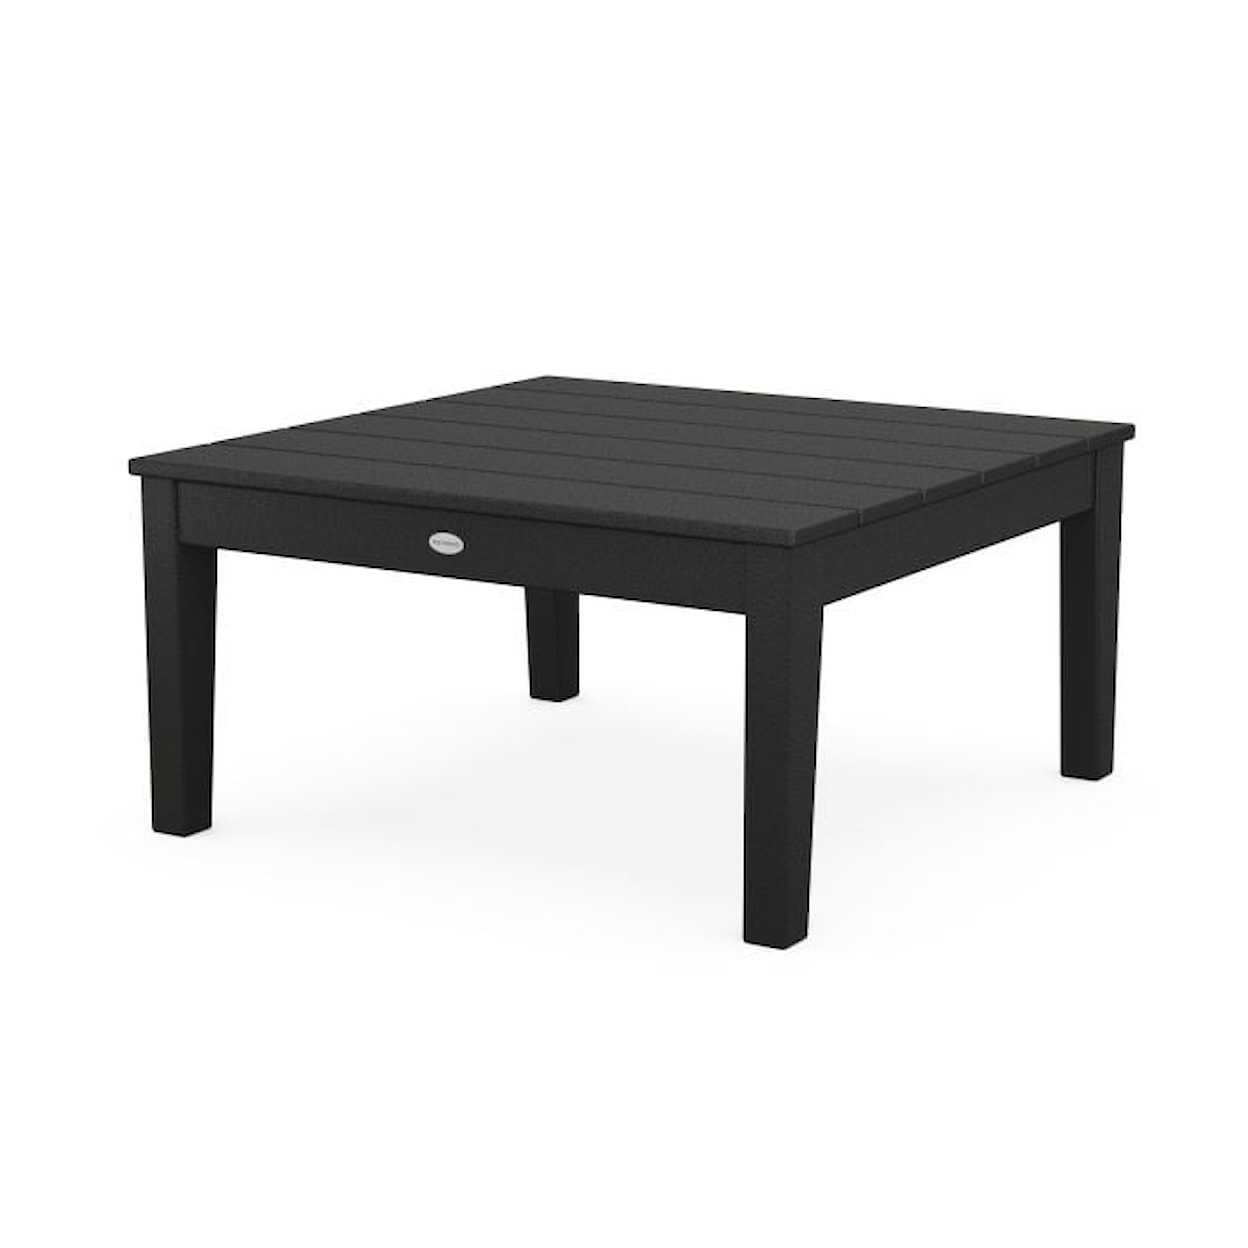 Polywood Table Collection Newport 36" Square Cocktail Table in Black